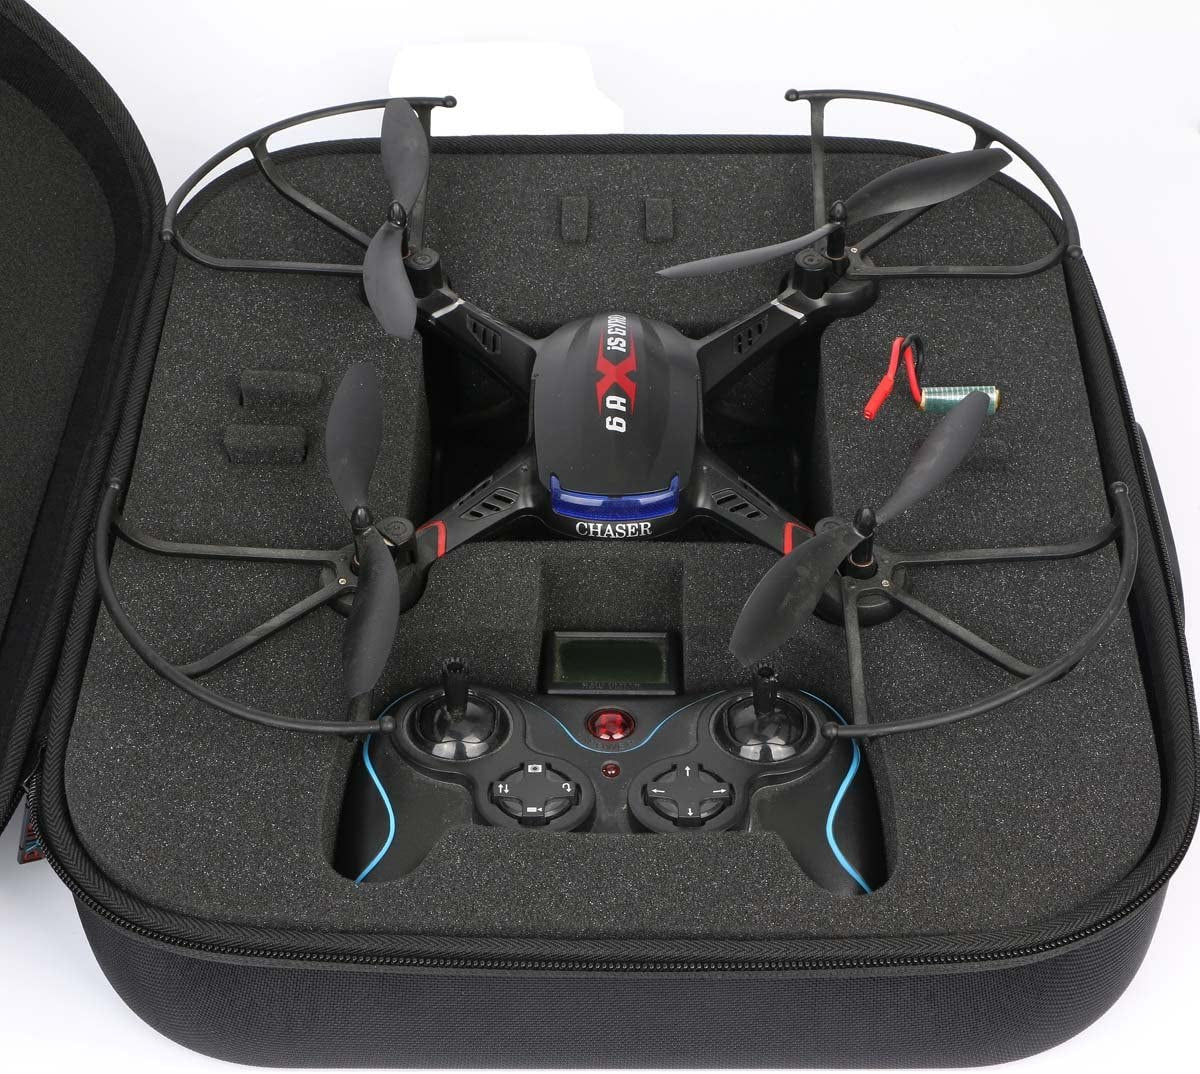 Hard Travel Case Replacement for Holy Stone F181C / F181W RC HD Camera Quadcopter Drone